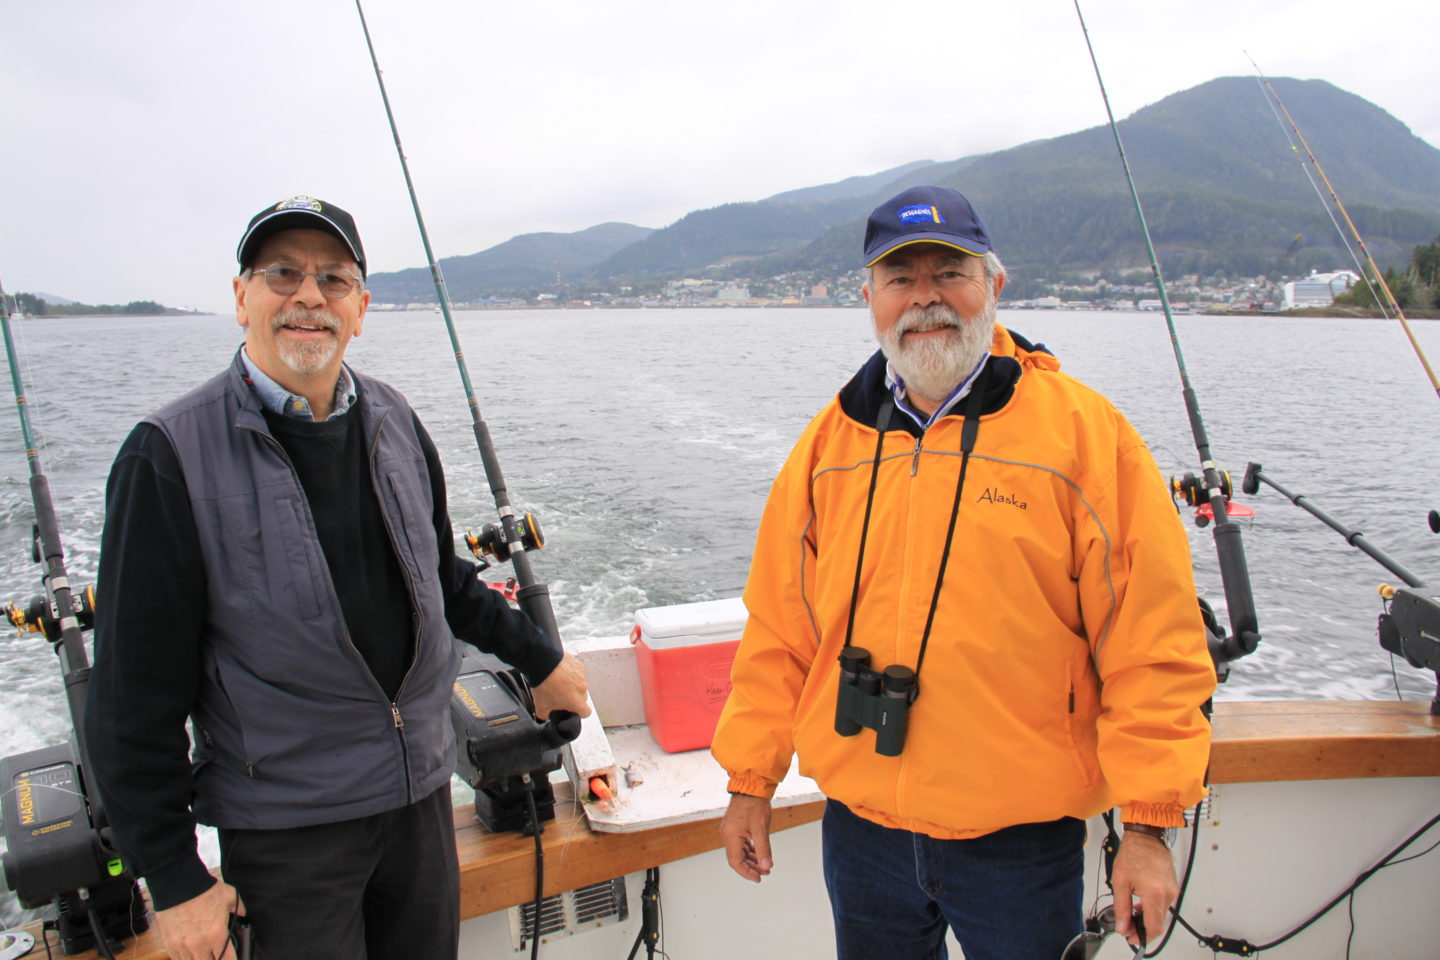 Denis and Louis-Simon out salmon fishing near Ketchikan during our Alaska Cruise with Princess Cruises